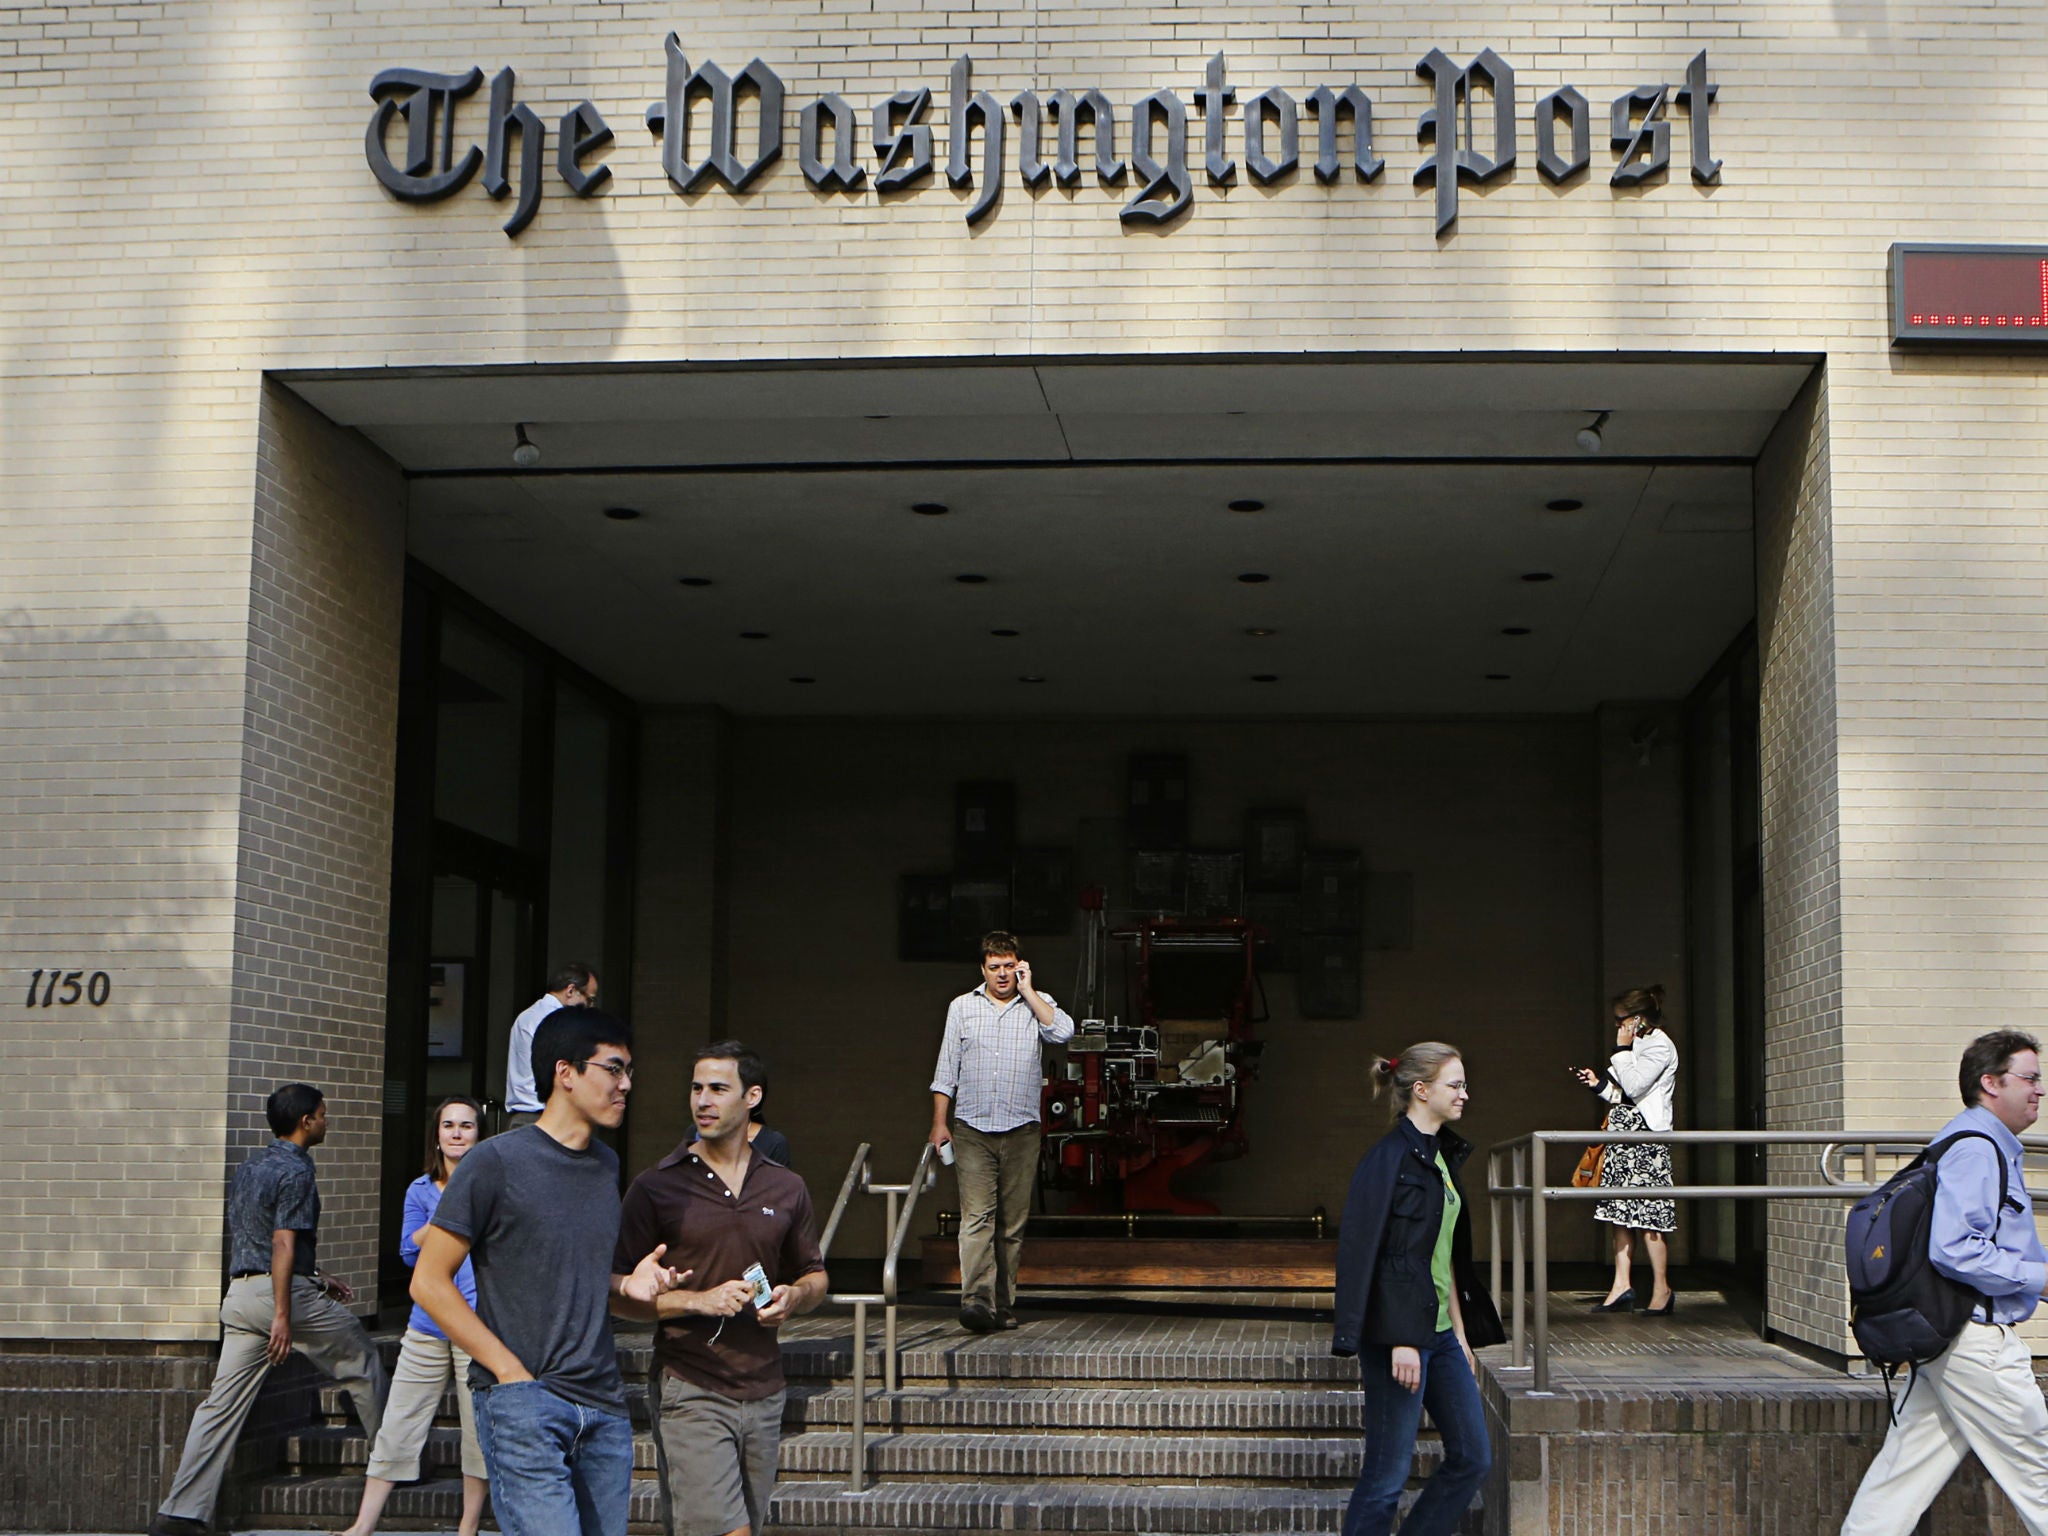 A view of the Washington Post's then-newsroom in Washington, DC on August 5, 2013